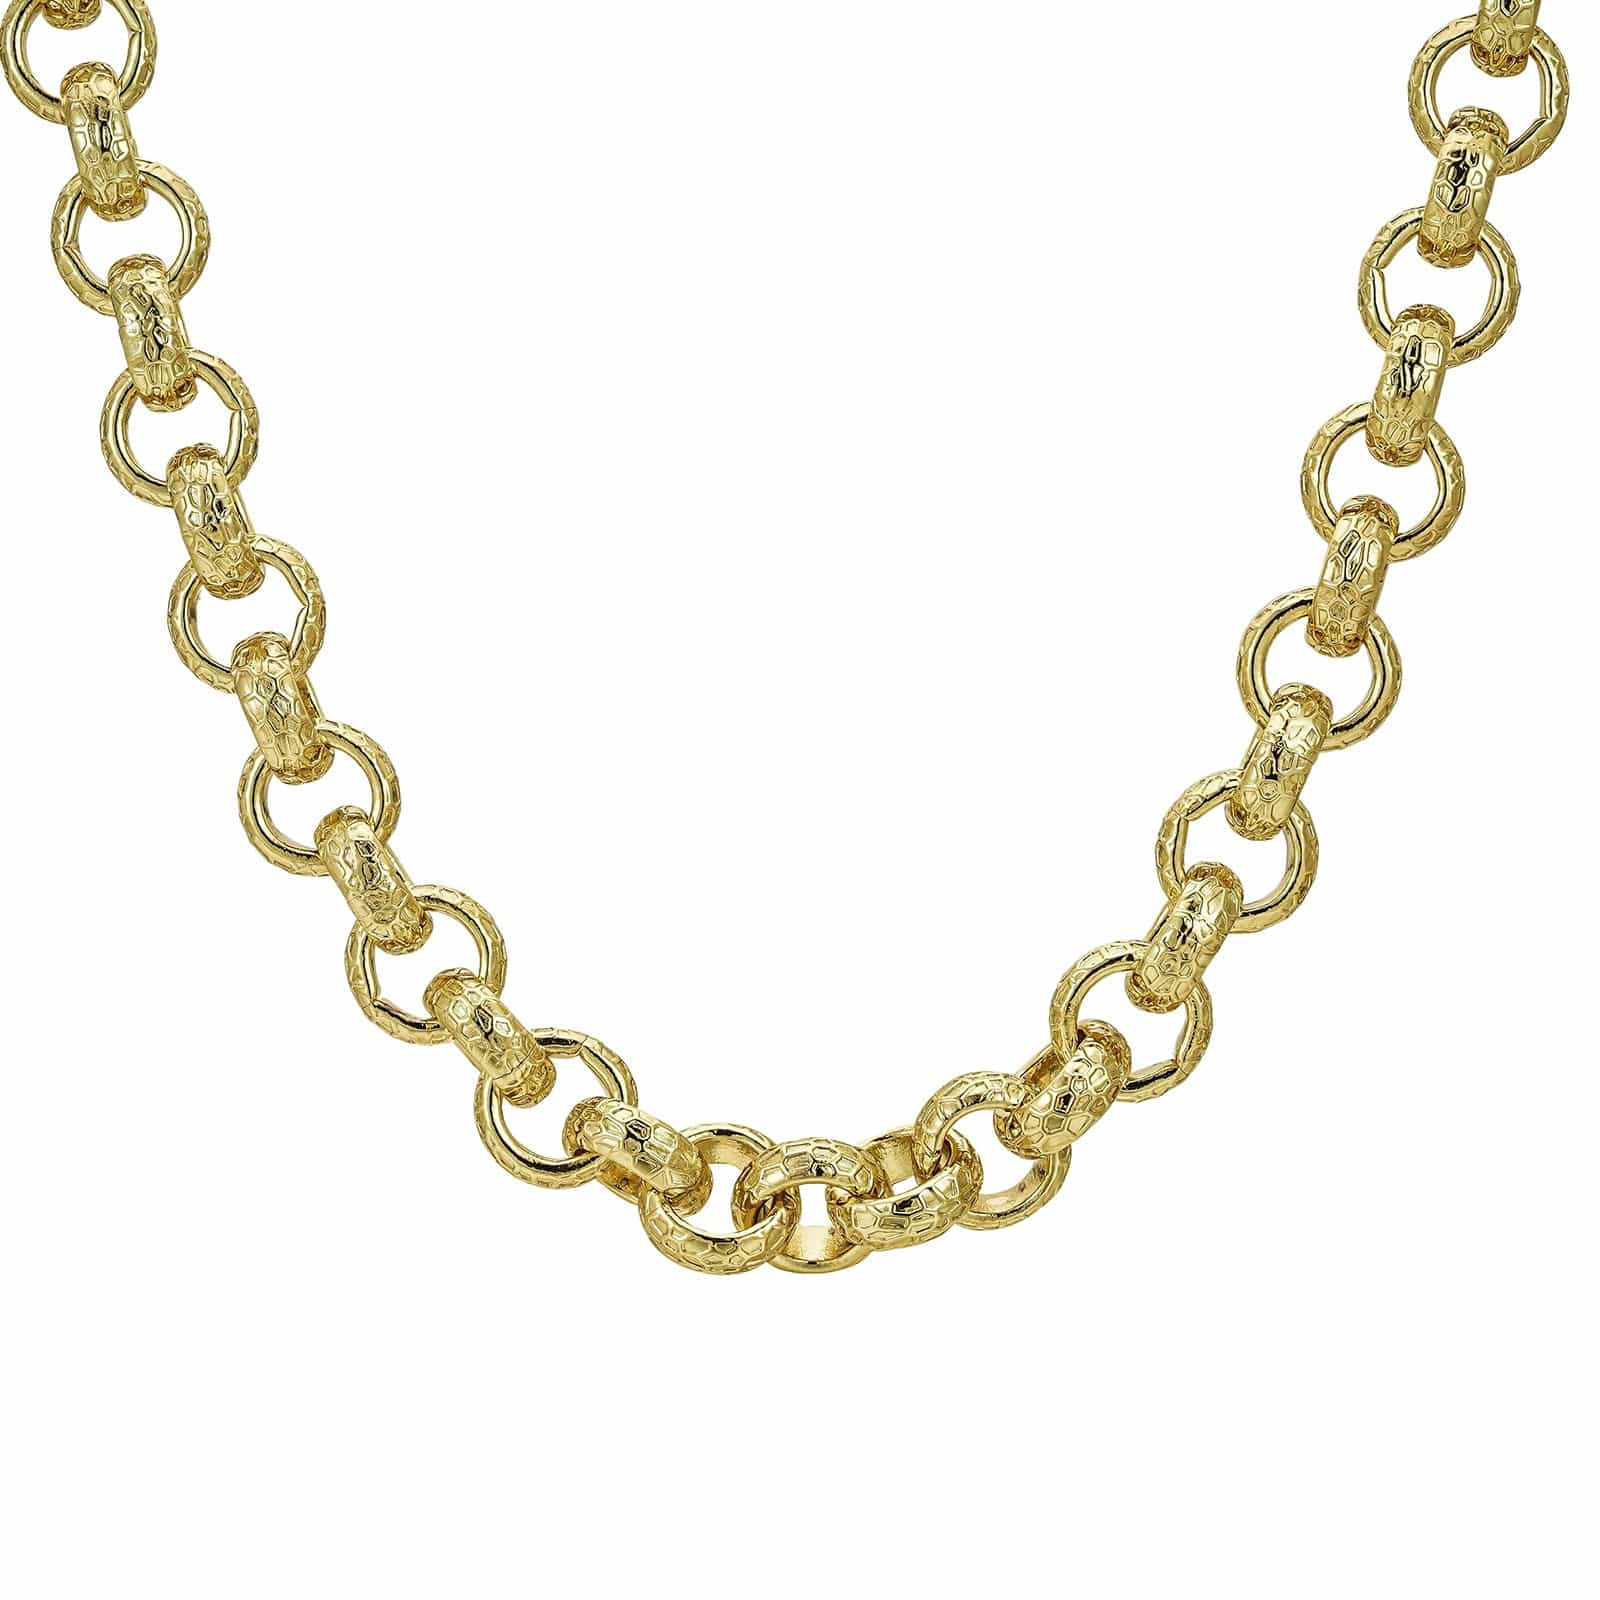 Gold Dipped Chains Patterned Belcher Chain 12mm - Gold